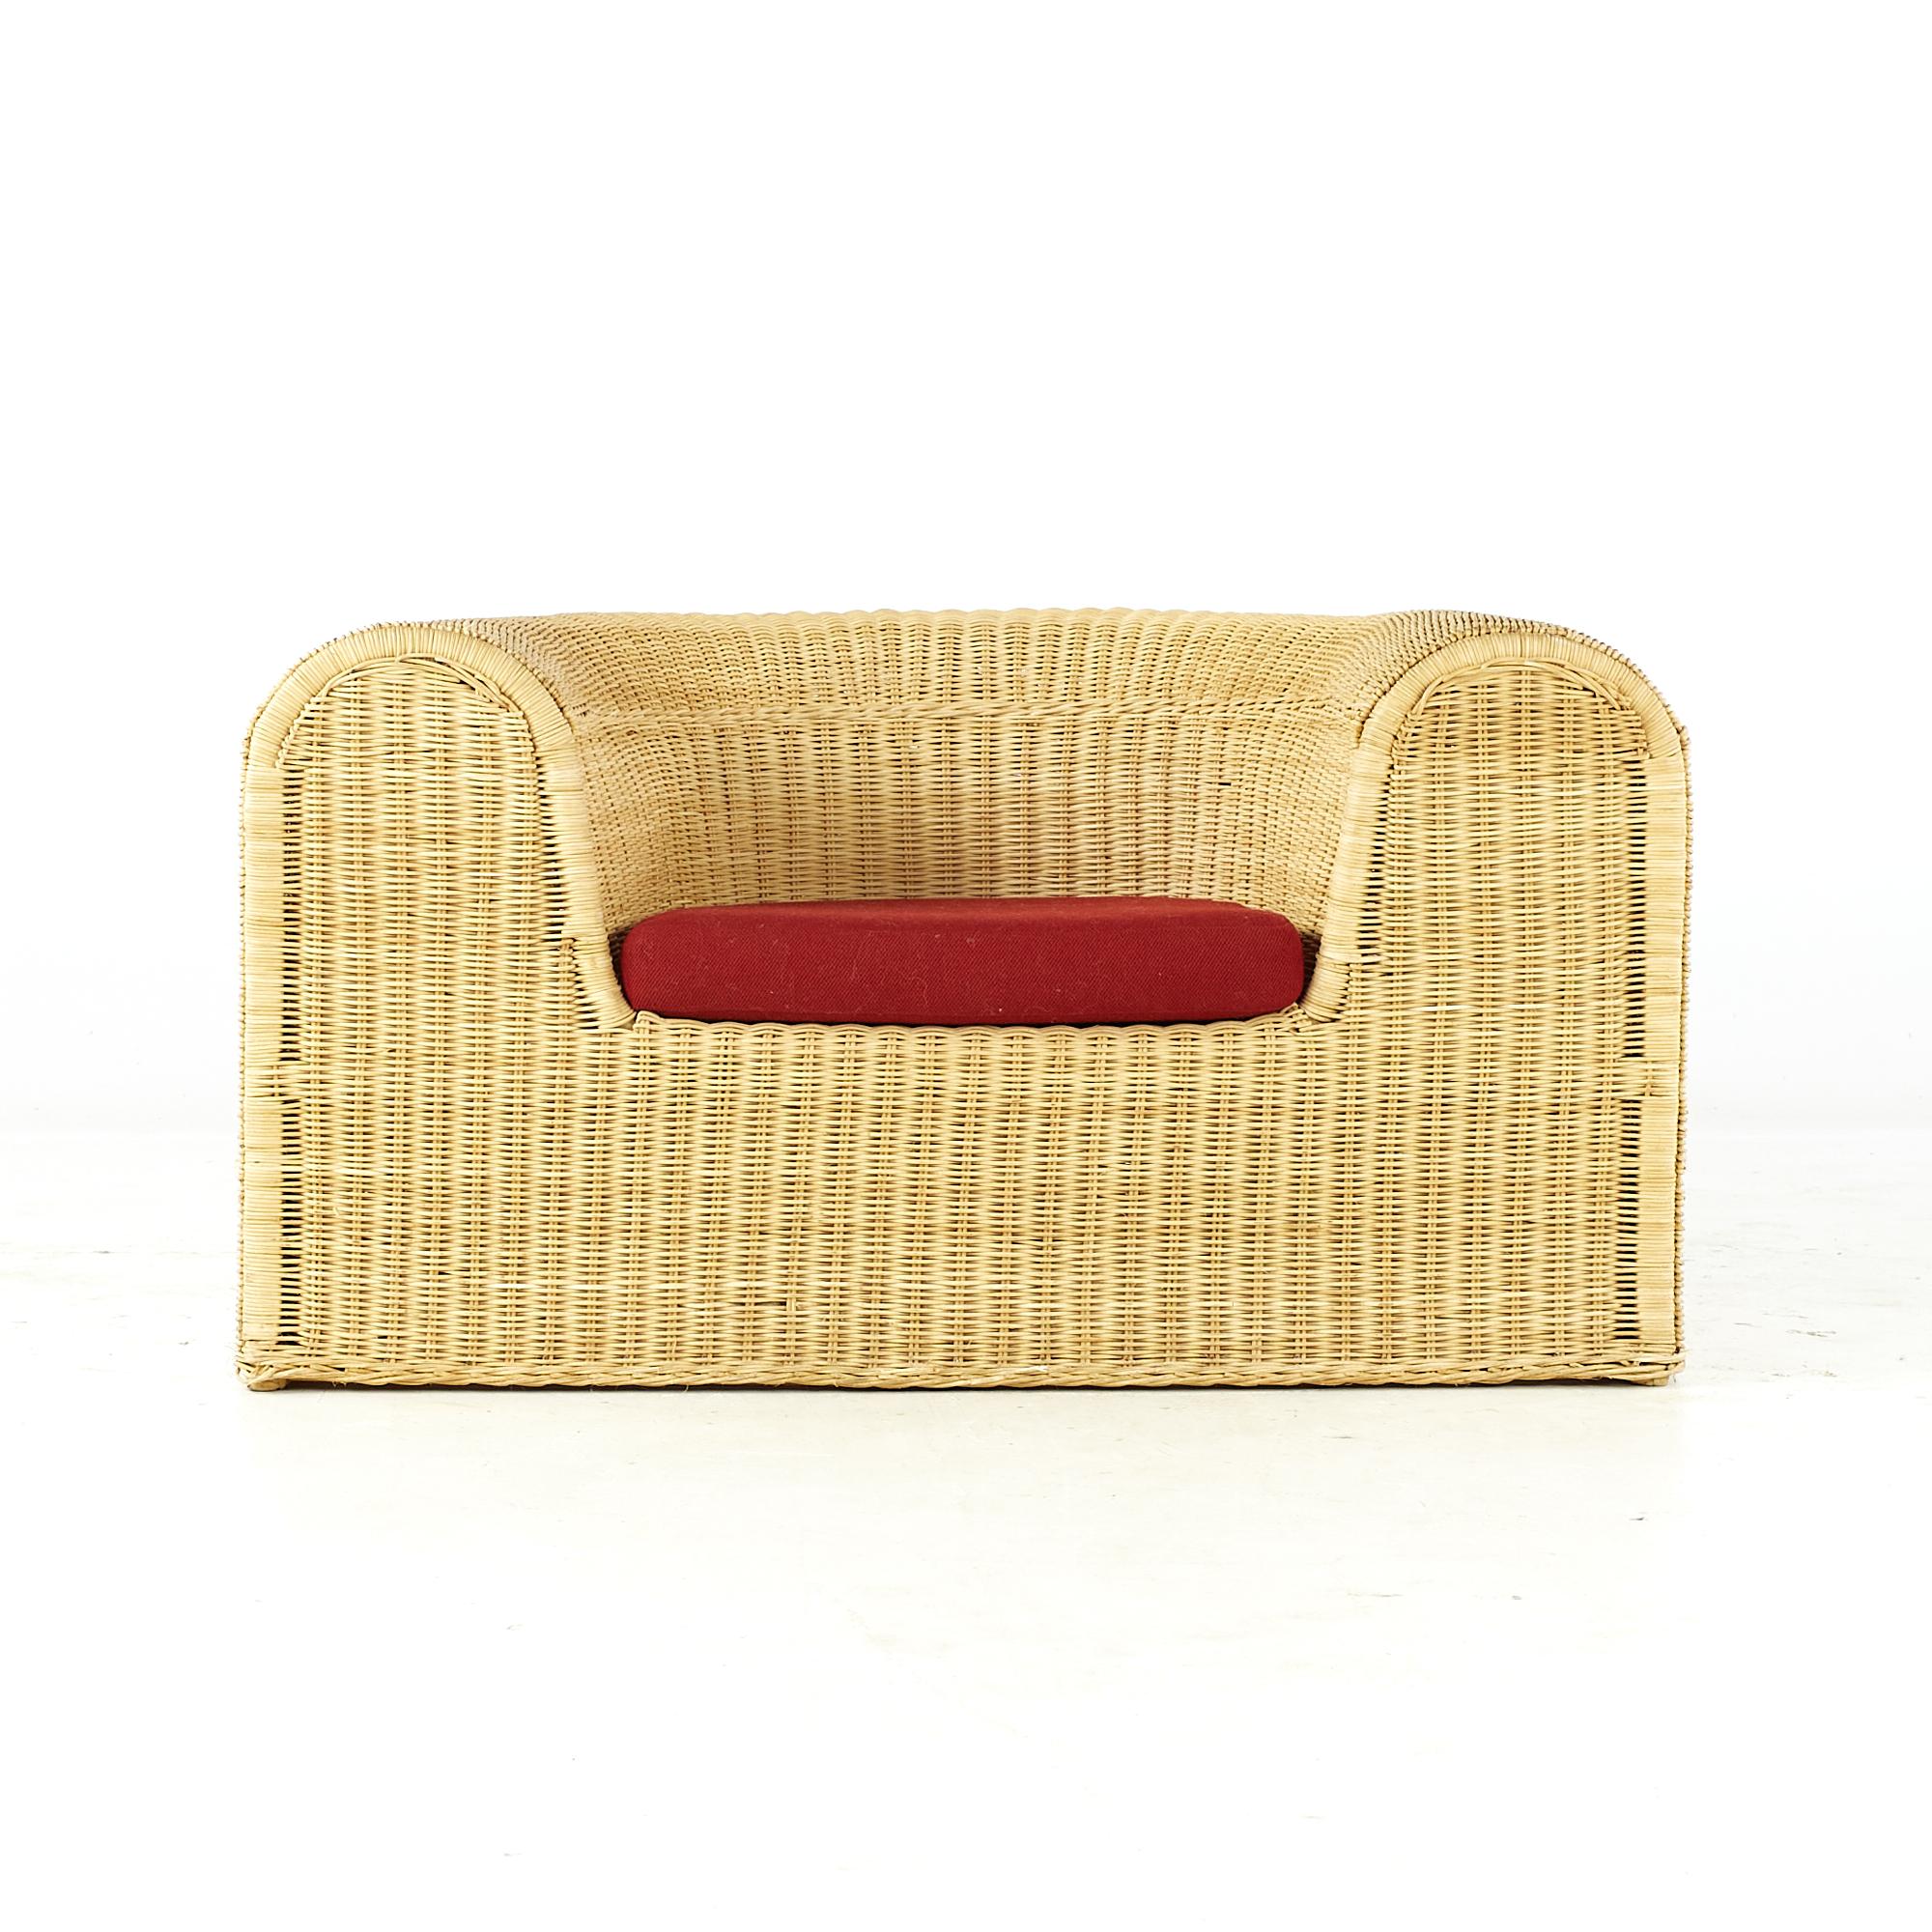 Eero Aarnio midcentury rattan lounge chair.

This chair measures: 45 wide x 32 deep x 24 high, with a seat height of 14.5 and arm height/chair clearance 24 inches

All pieces of furniture can be had in what we call restored vintage condition.